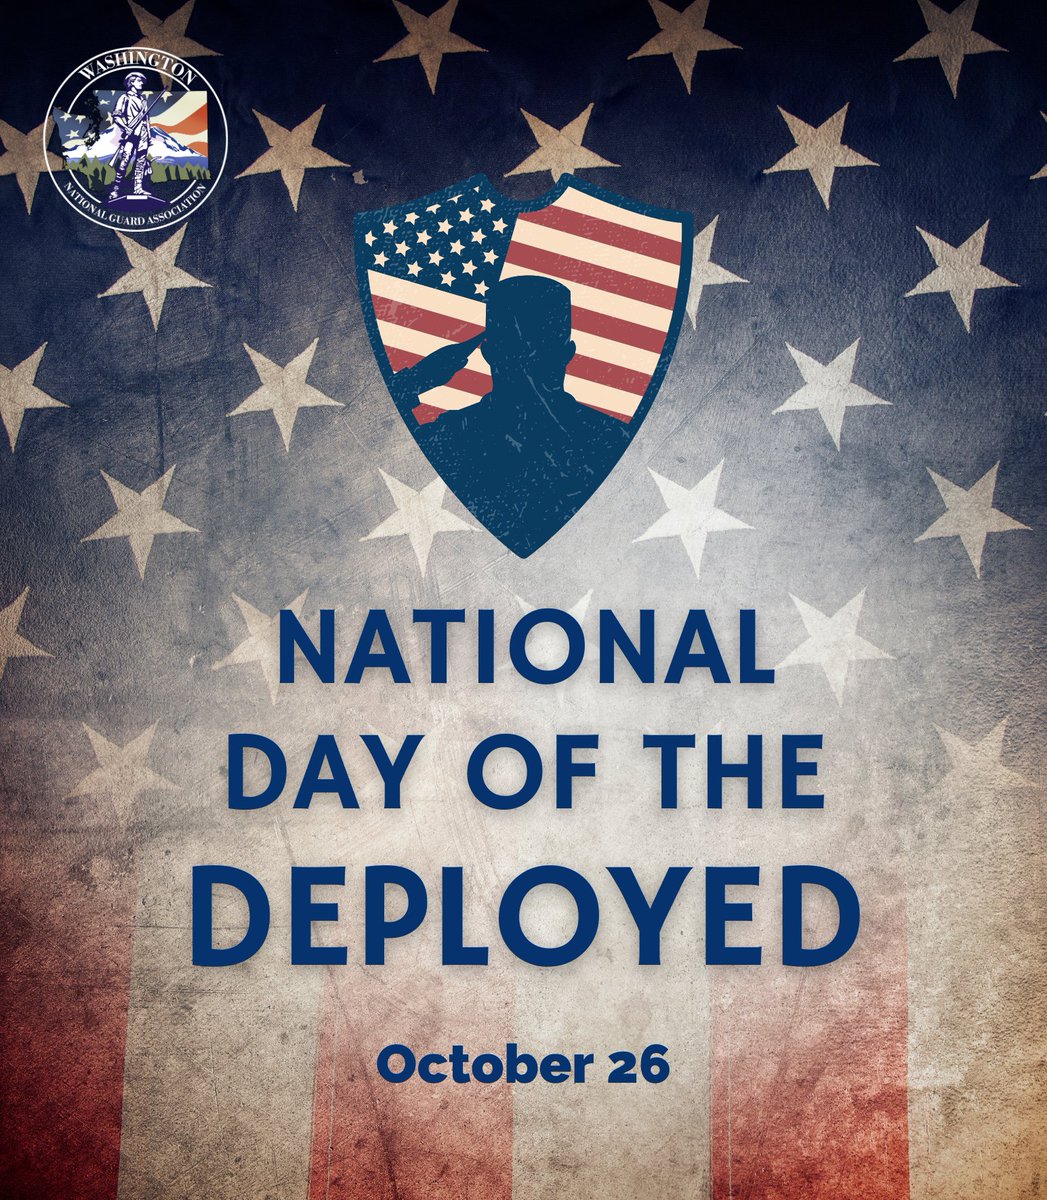 Today is National #DayoftheDeployed. We're sending a shout-out to all those who are currently deployed. We're thinking about you. We're grateful for you. We recognize the sacrifices you and your family make during a deployment. And we can't wait for you to come back home.